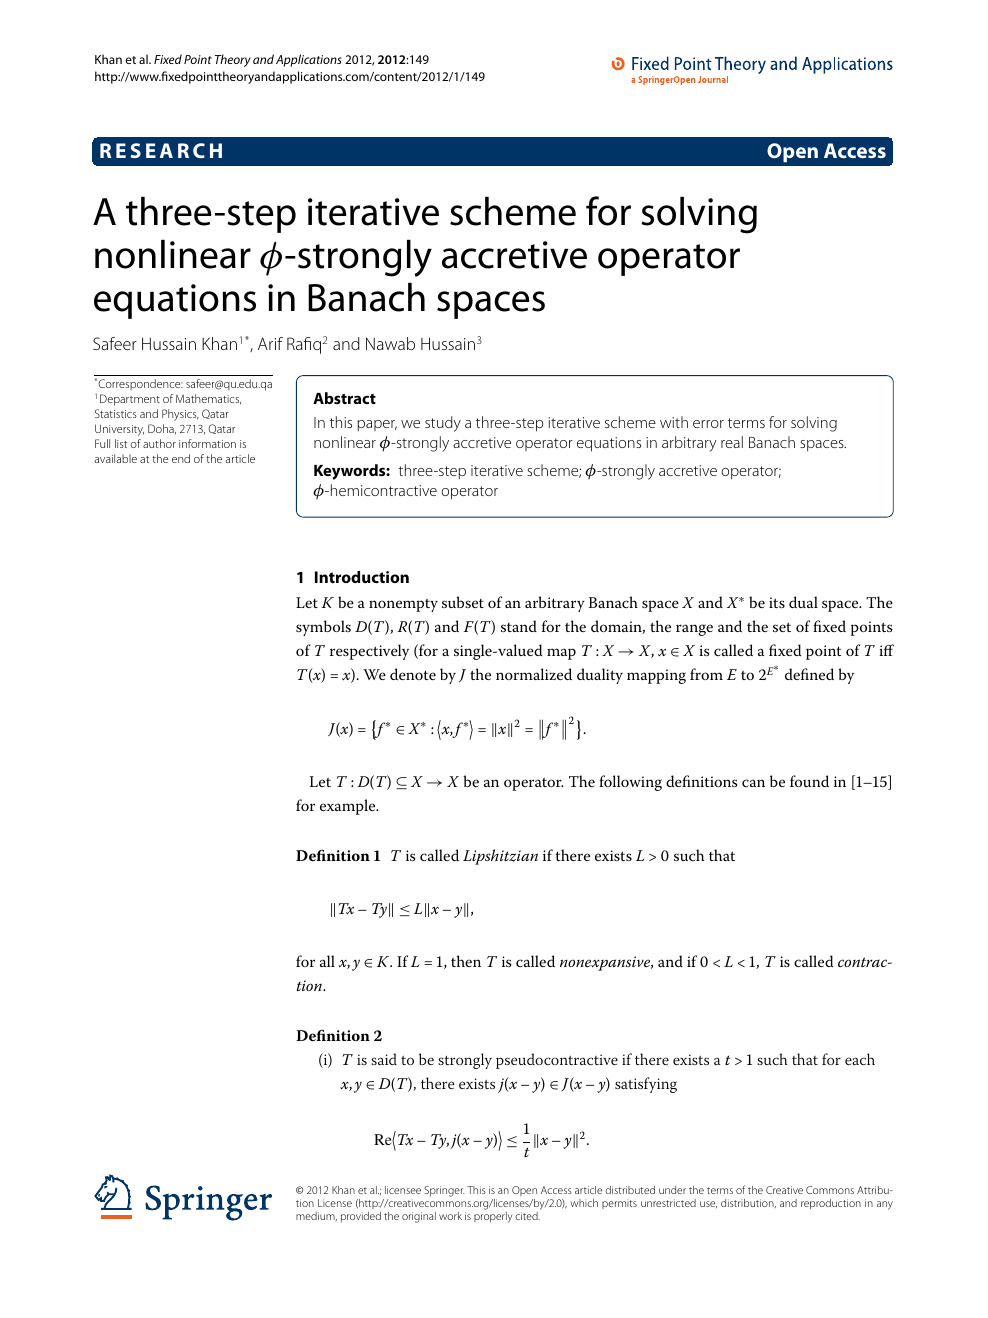 A Three Step Iterative Scheme For Solving Nonlinear ϕ Strongly Accretive Operator Equations In Banach Spaces Topic Of Research Paper In Mathematics Download Scholarly Article Pdf And Read For Free On Cyberleninka Open